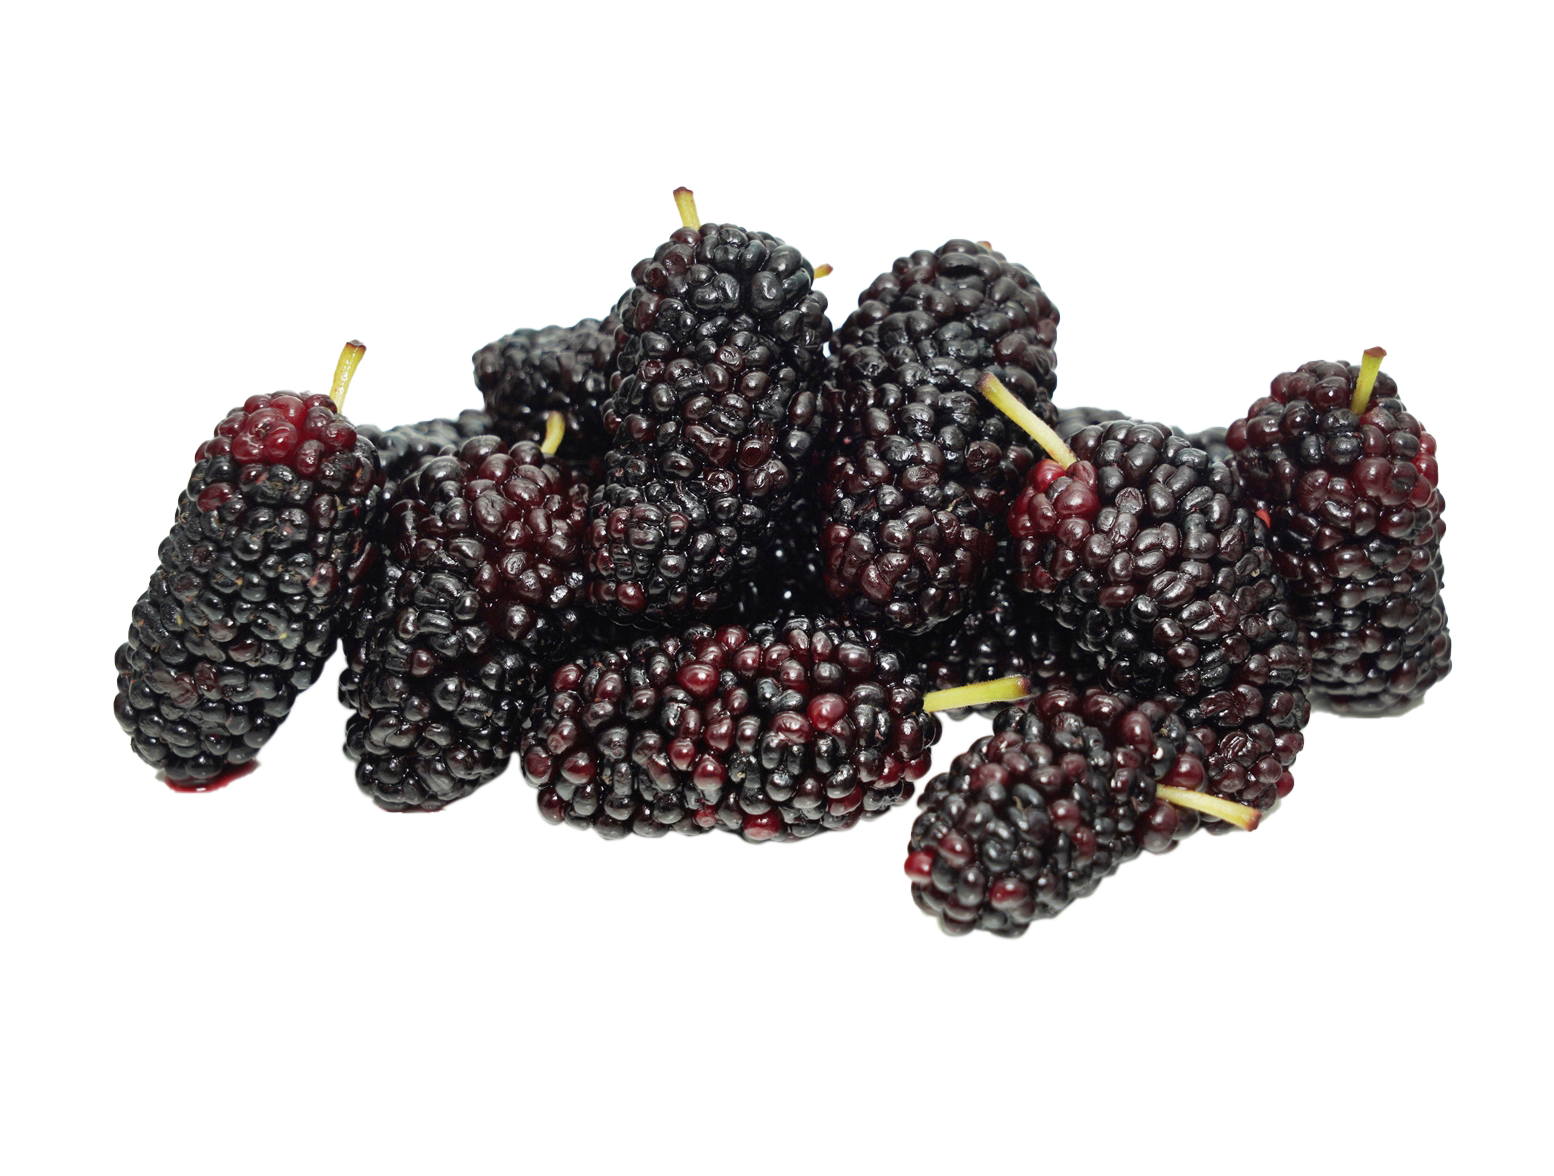 What are the health benefits of mulberry extract?